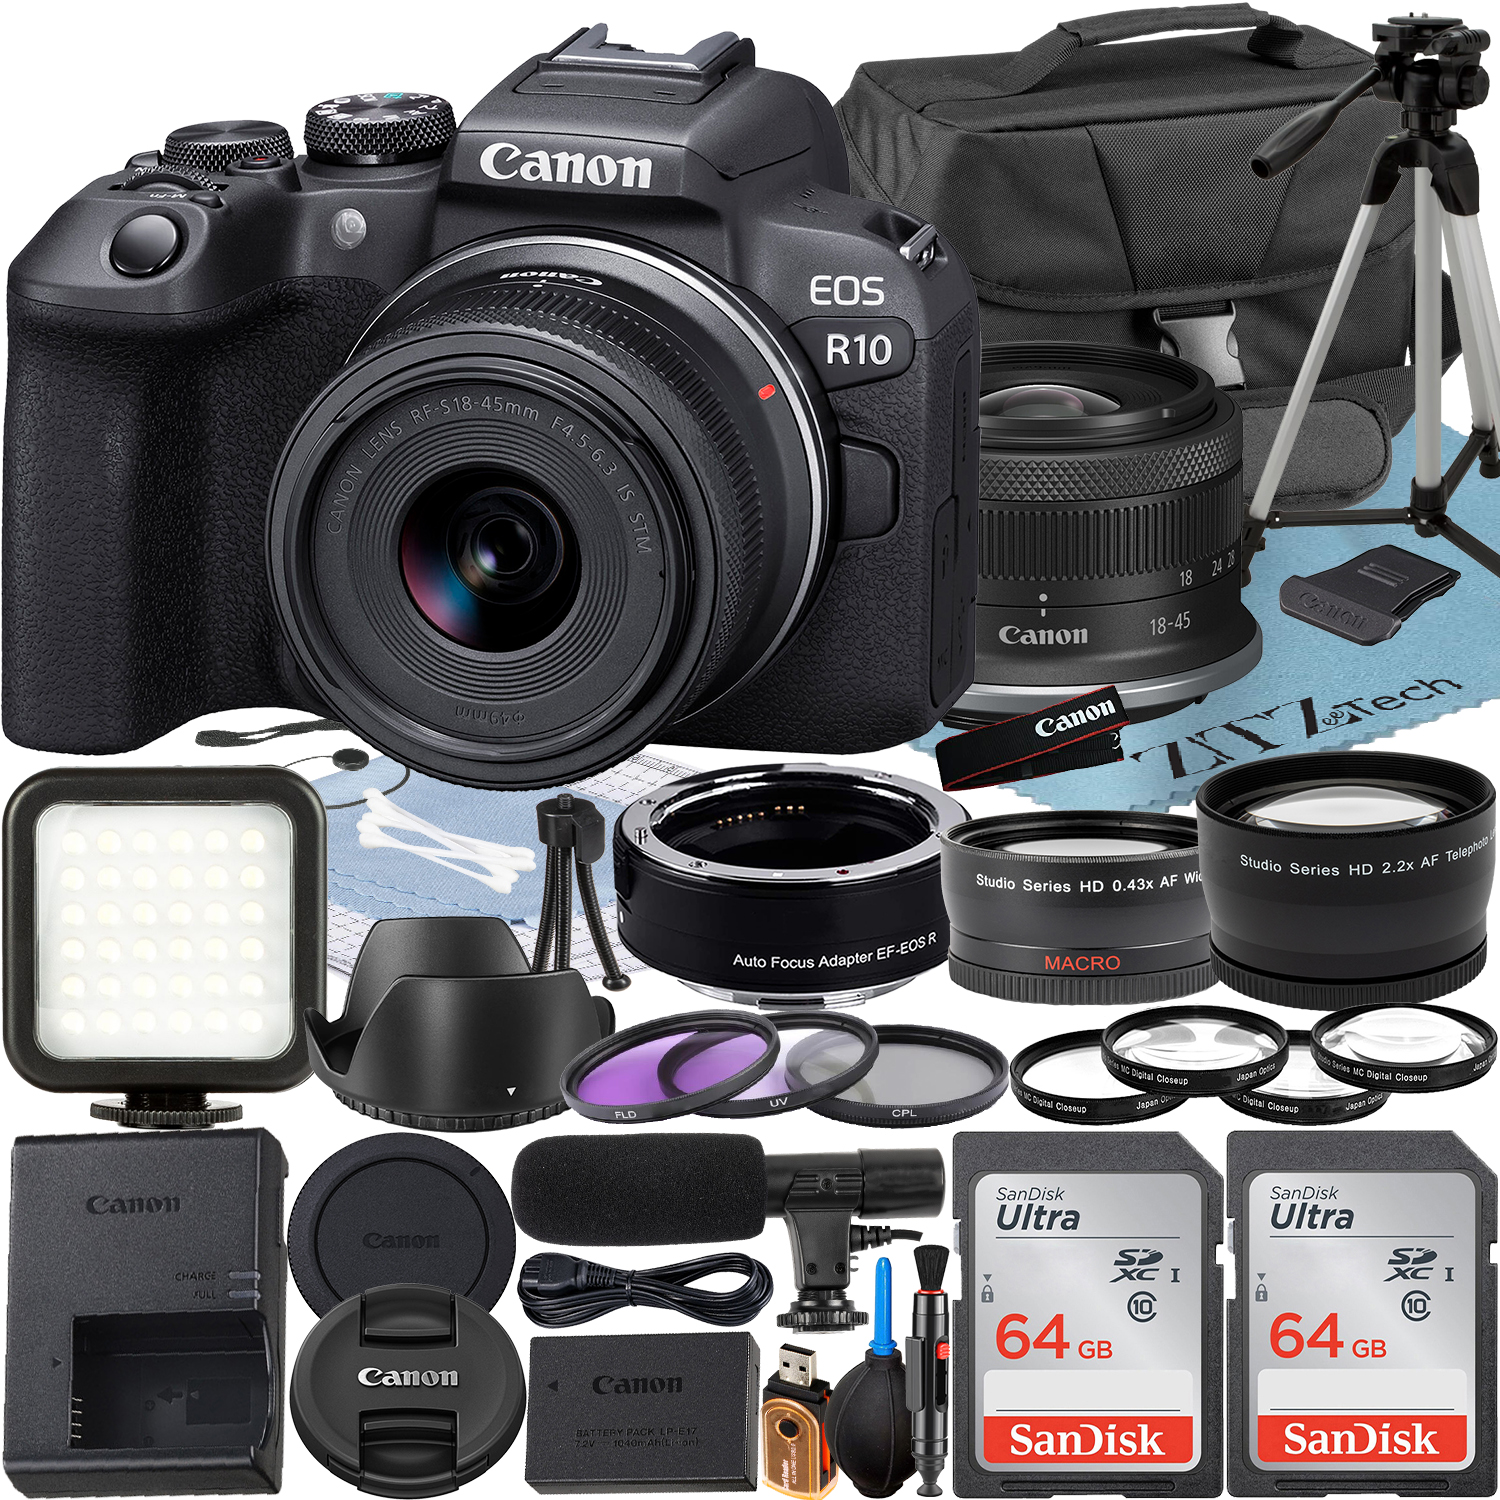 Canon EOS R10 Mirrorless Camera with RF-S 18-45mm Lens + Mount Adapter + 2 Pack SanDisk 64GB Memory Card + Case + ZeeTech Accessory